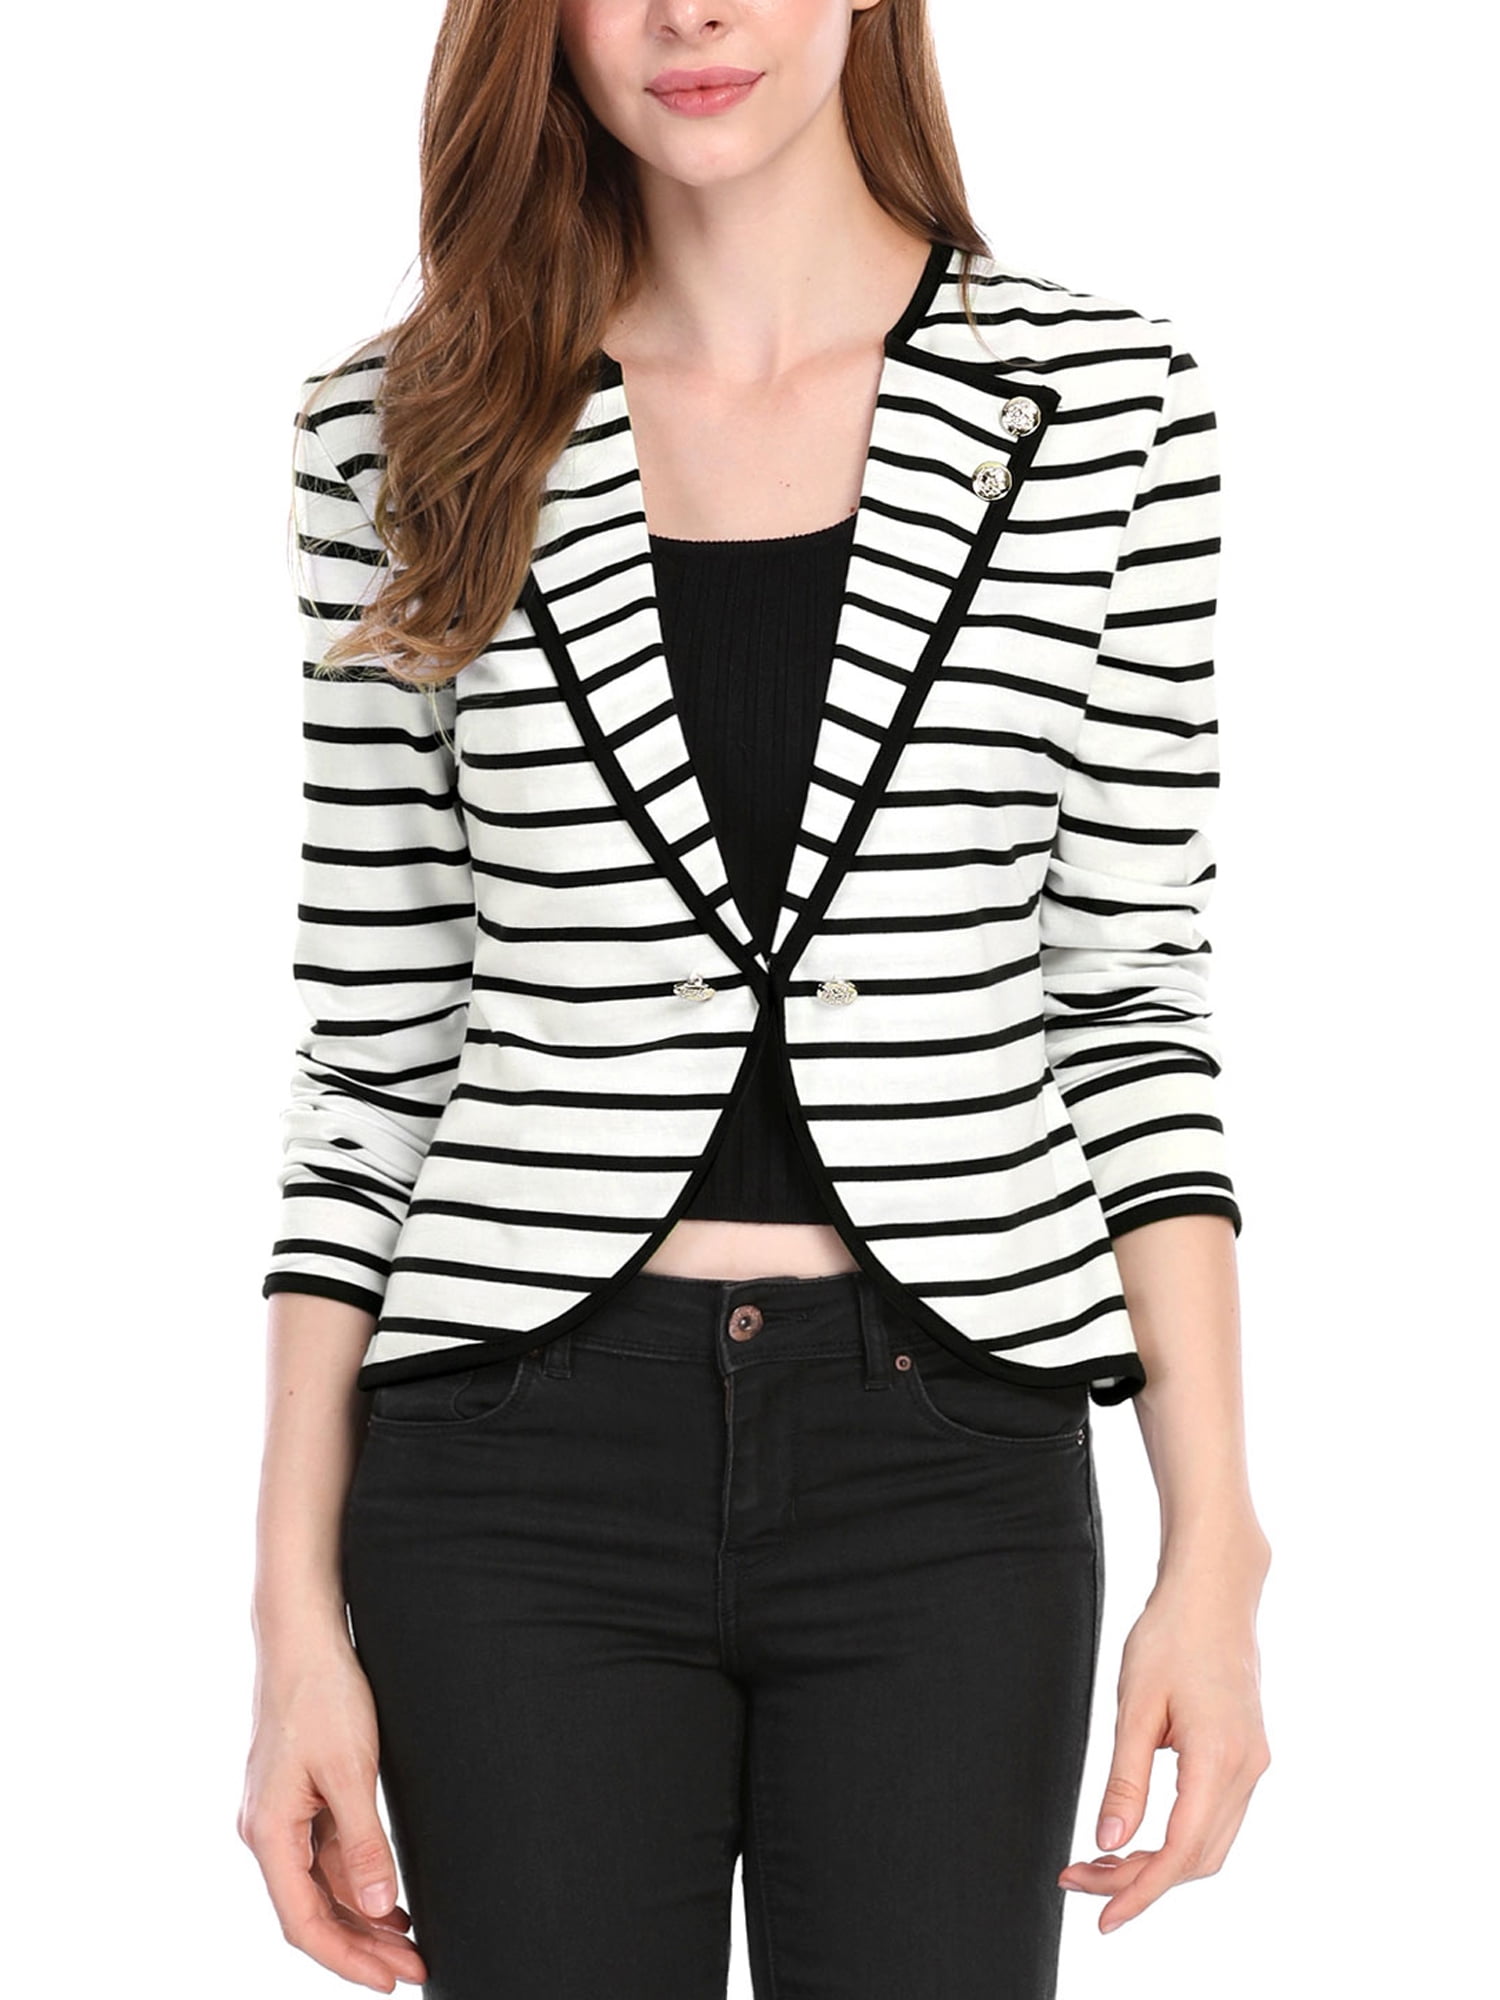 Tanming Womens Casual Office Work Suit Notch Lapel Mid Long Striped Jacket Blazer 